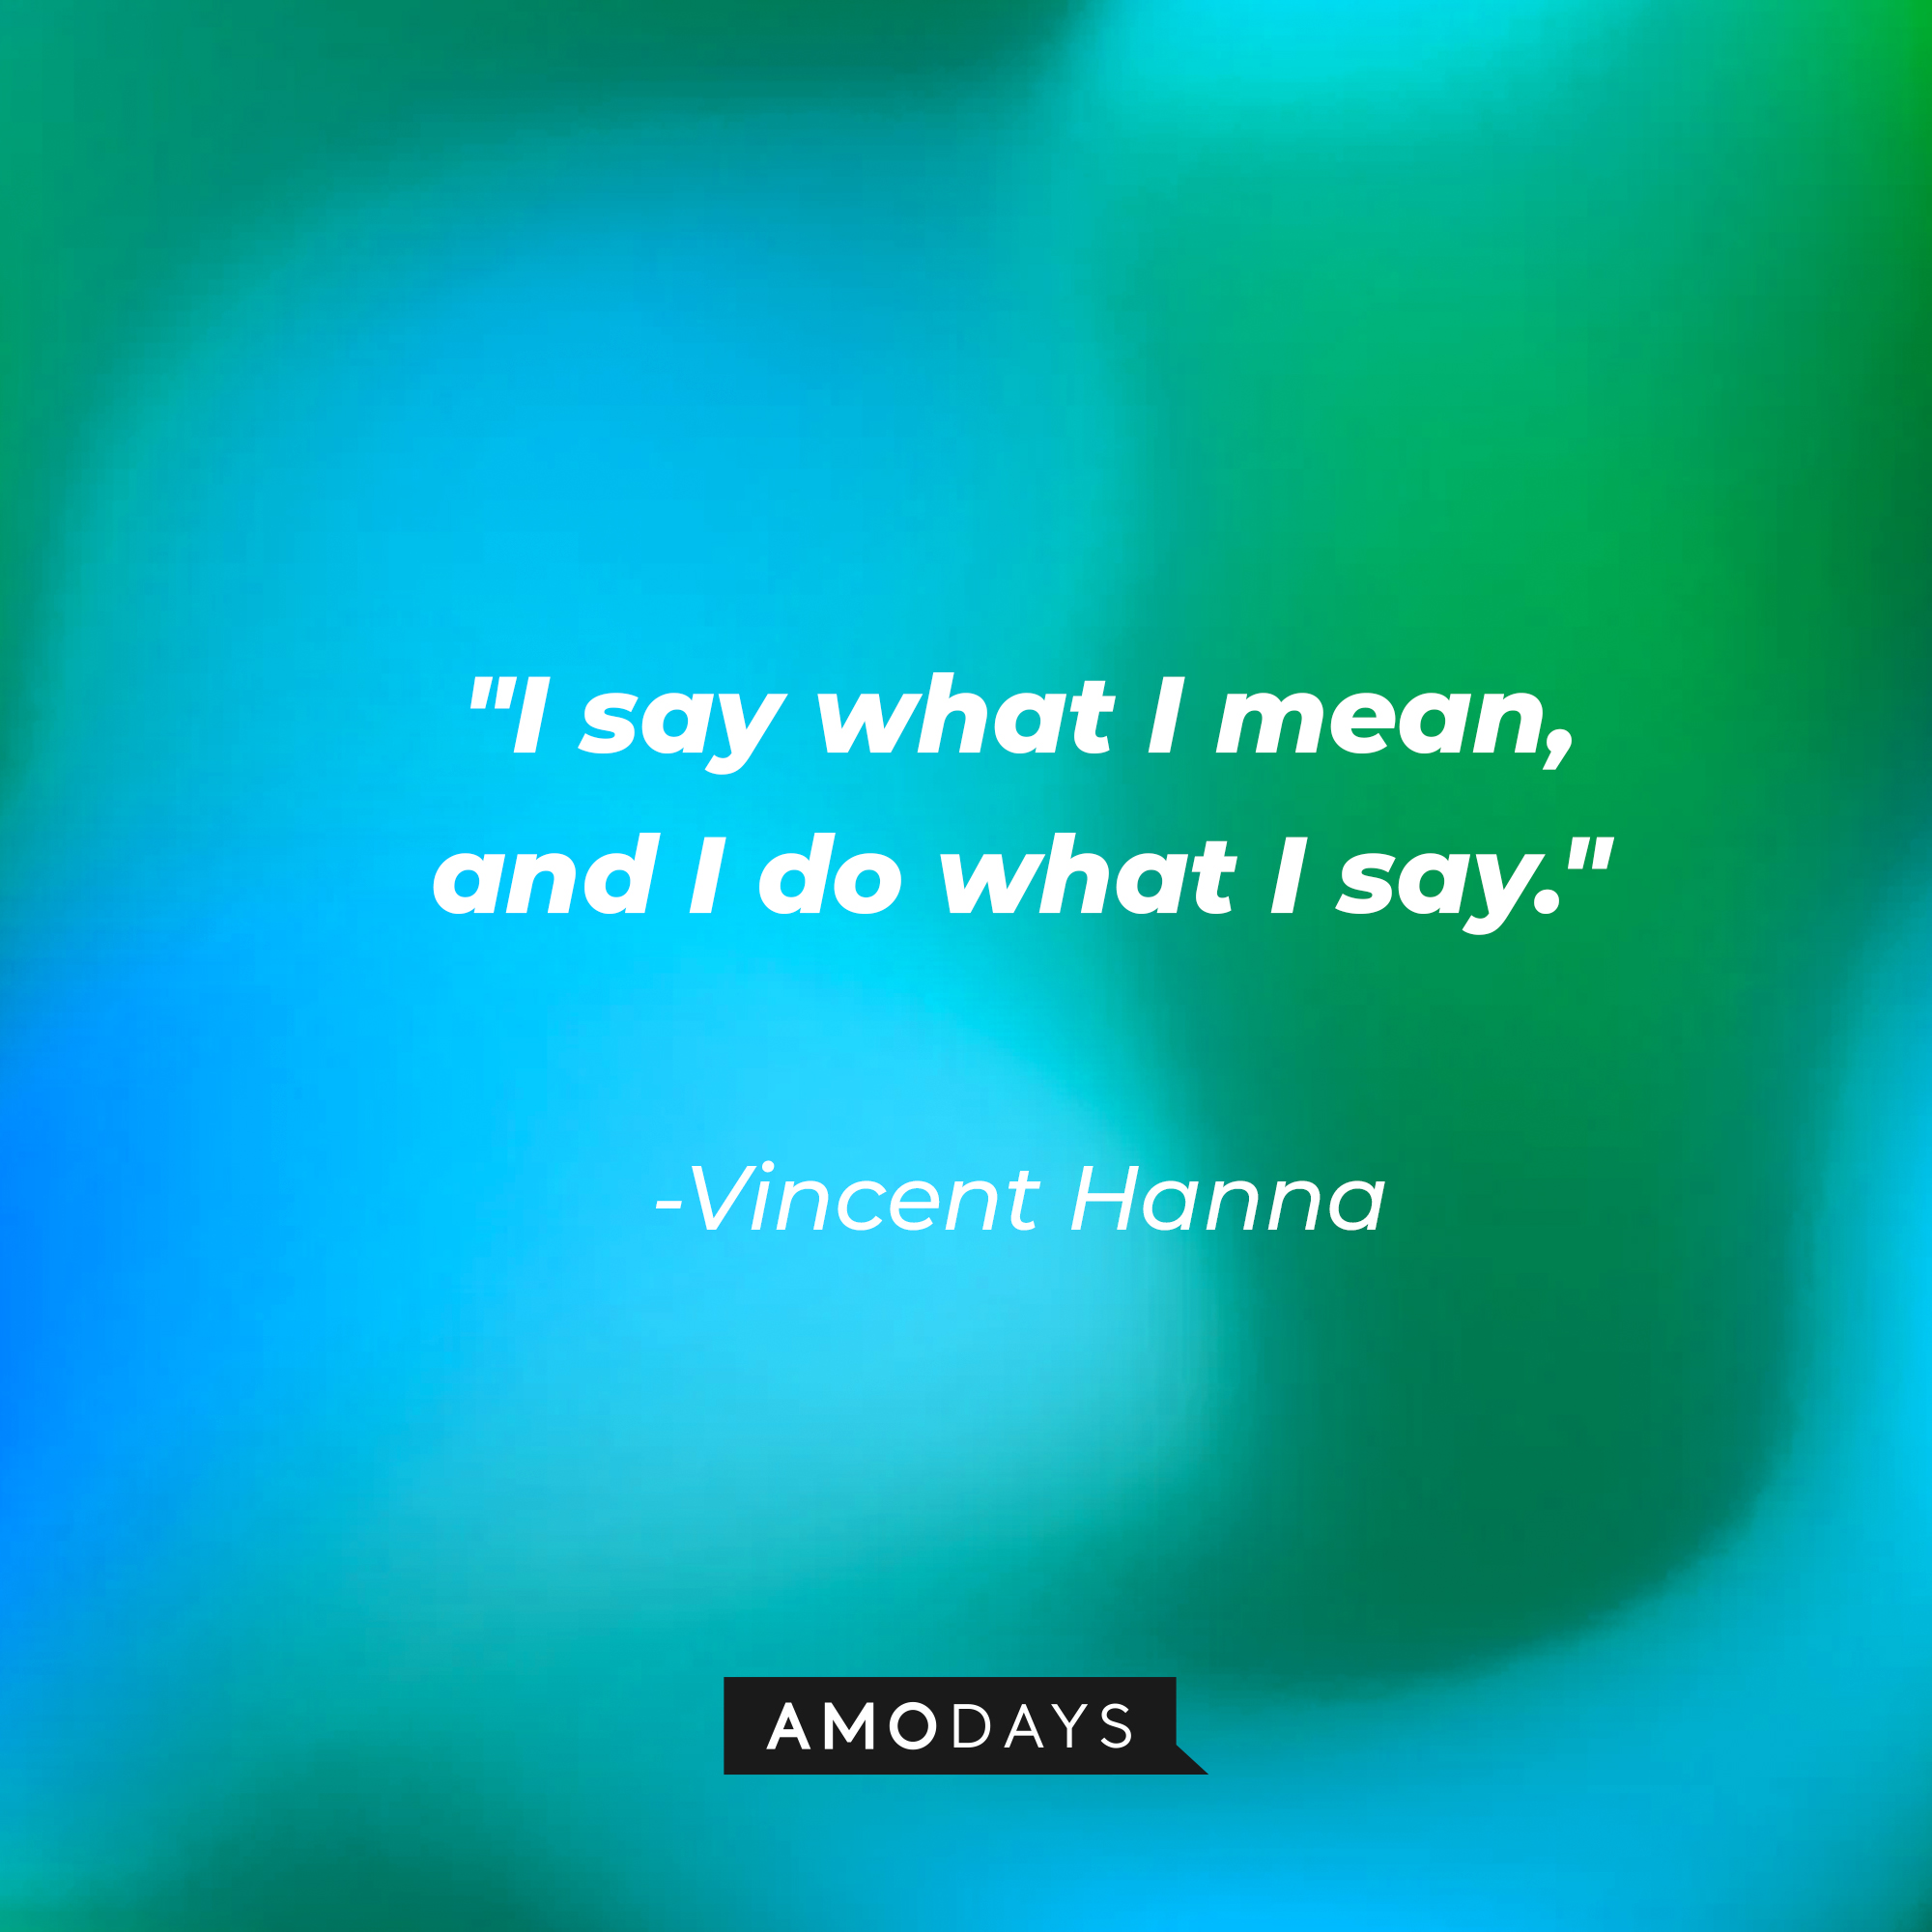 Vincent Hanna's quote: "I say what I mean, and I do what I say." | Source: AmoDays